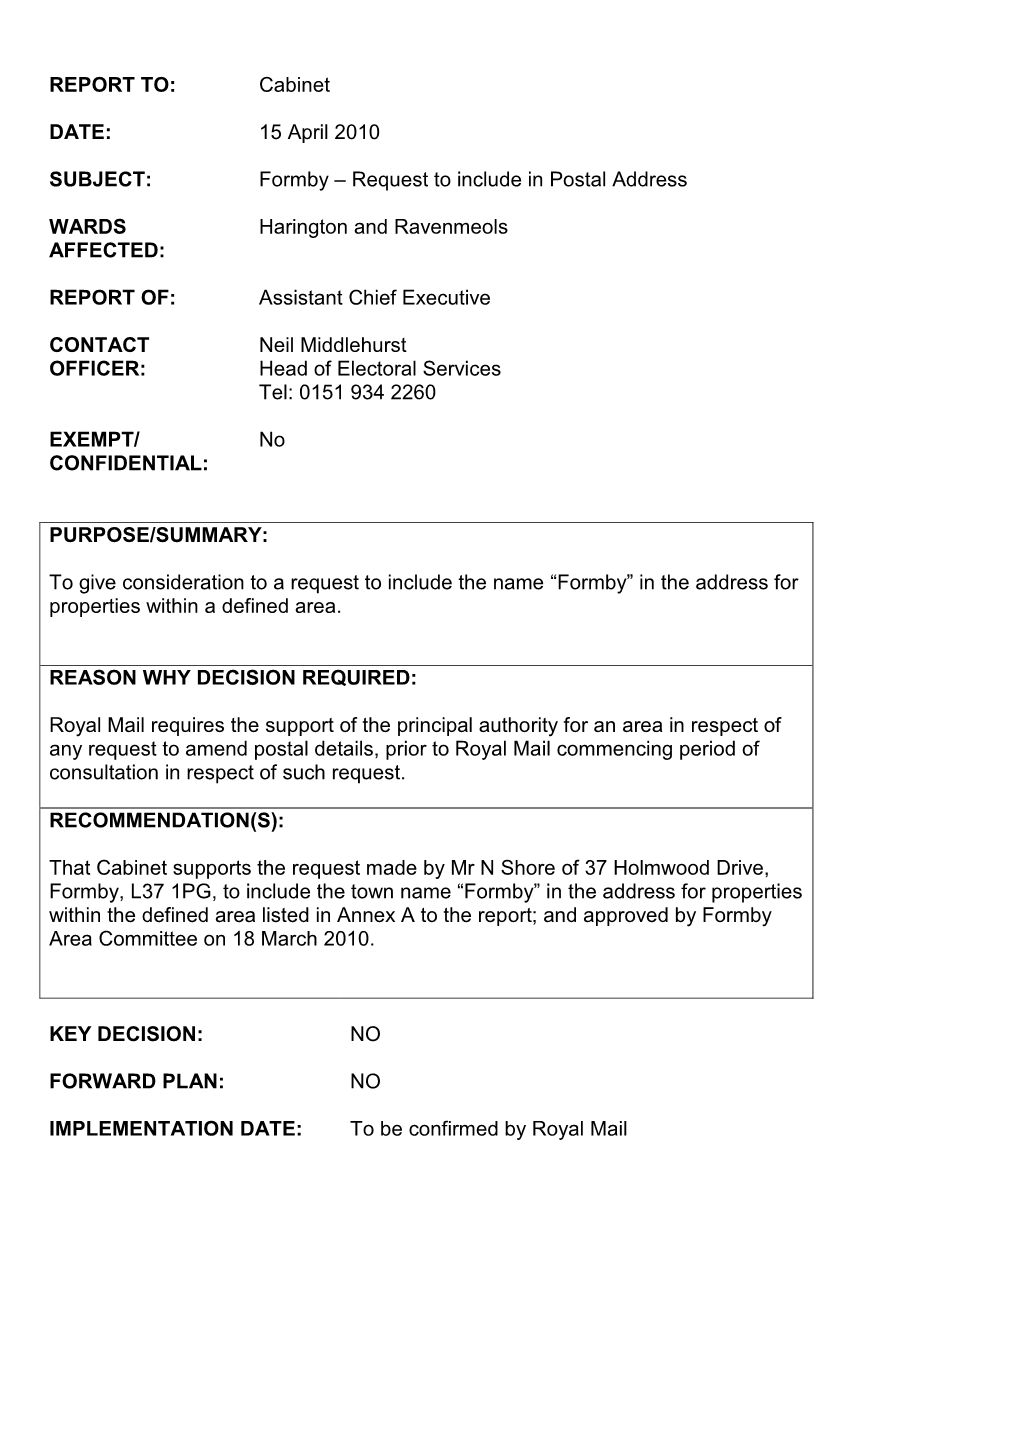 REPORT TO: Cabinet DATE: 15 April 2010 SUBJECT: Formby – Request to Include in Postal Address WARDS AFFECTED: Harington and Ra